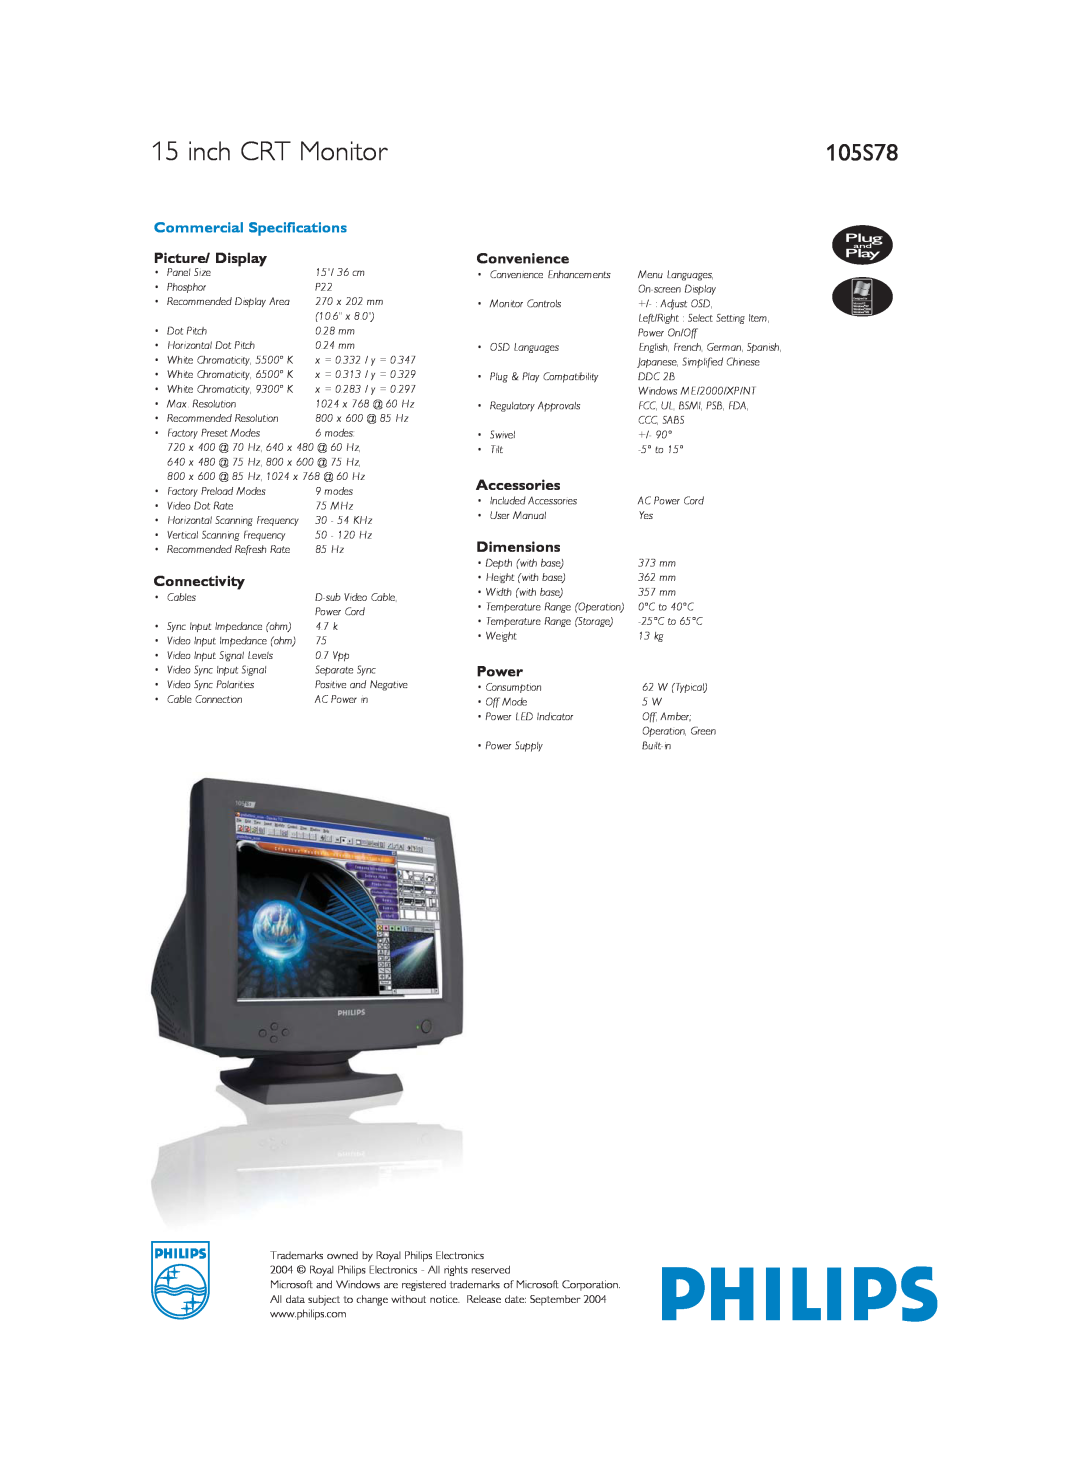 Philips 105S78 dimensions inch CRT Monitor, Commercial Specifications, Picture/ Display, Connectivity, Convenience, Power 